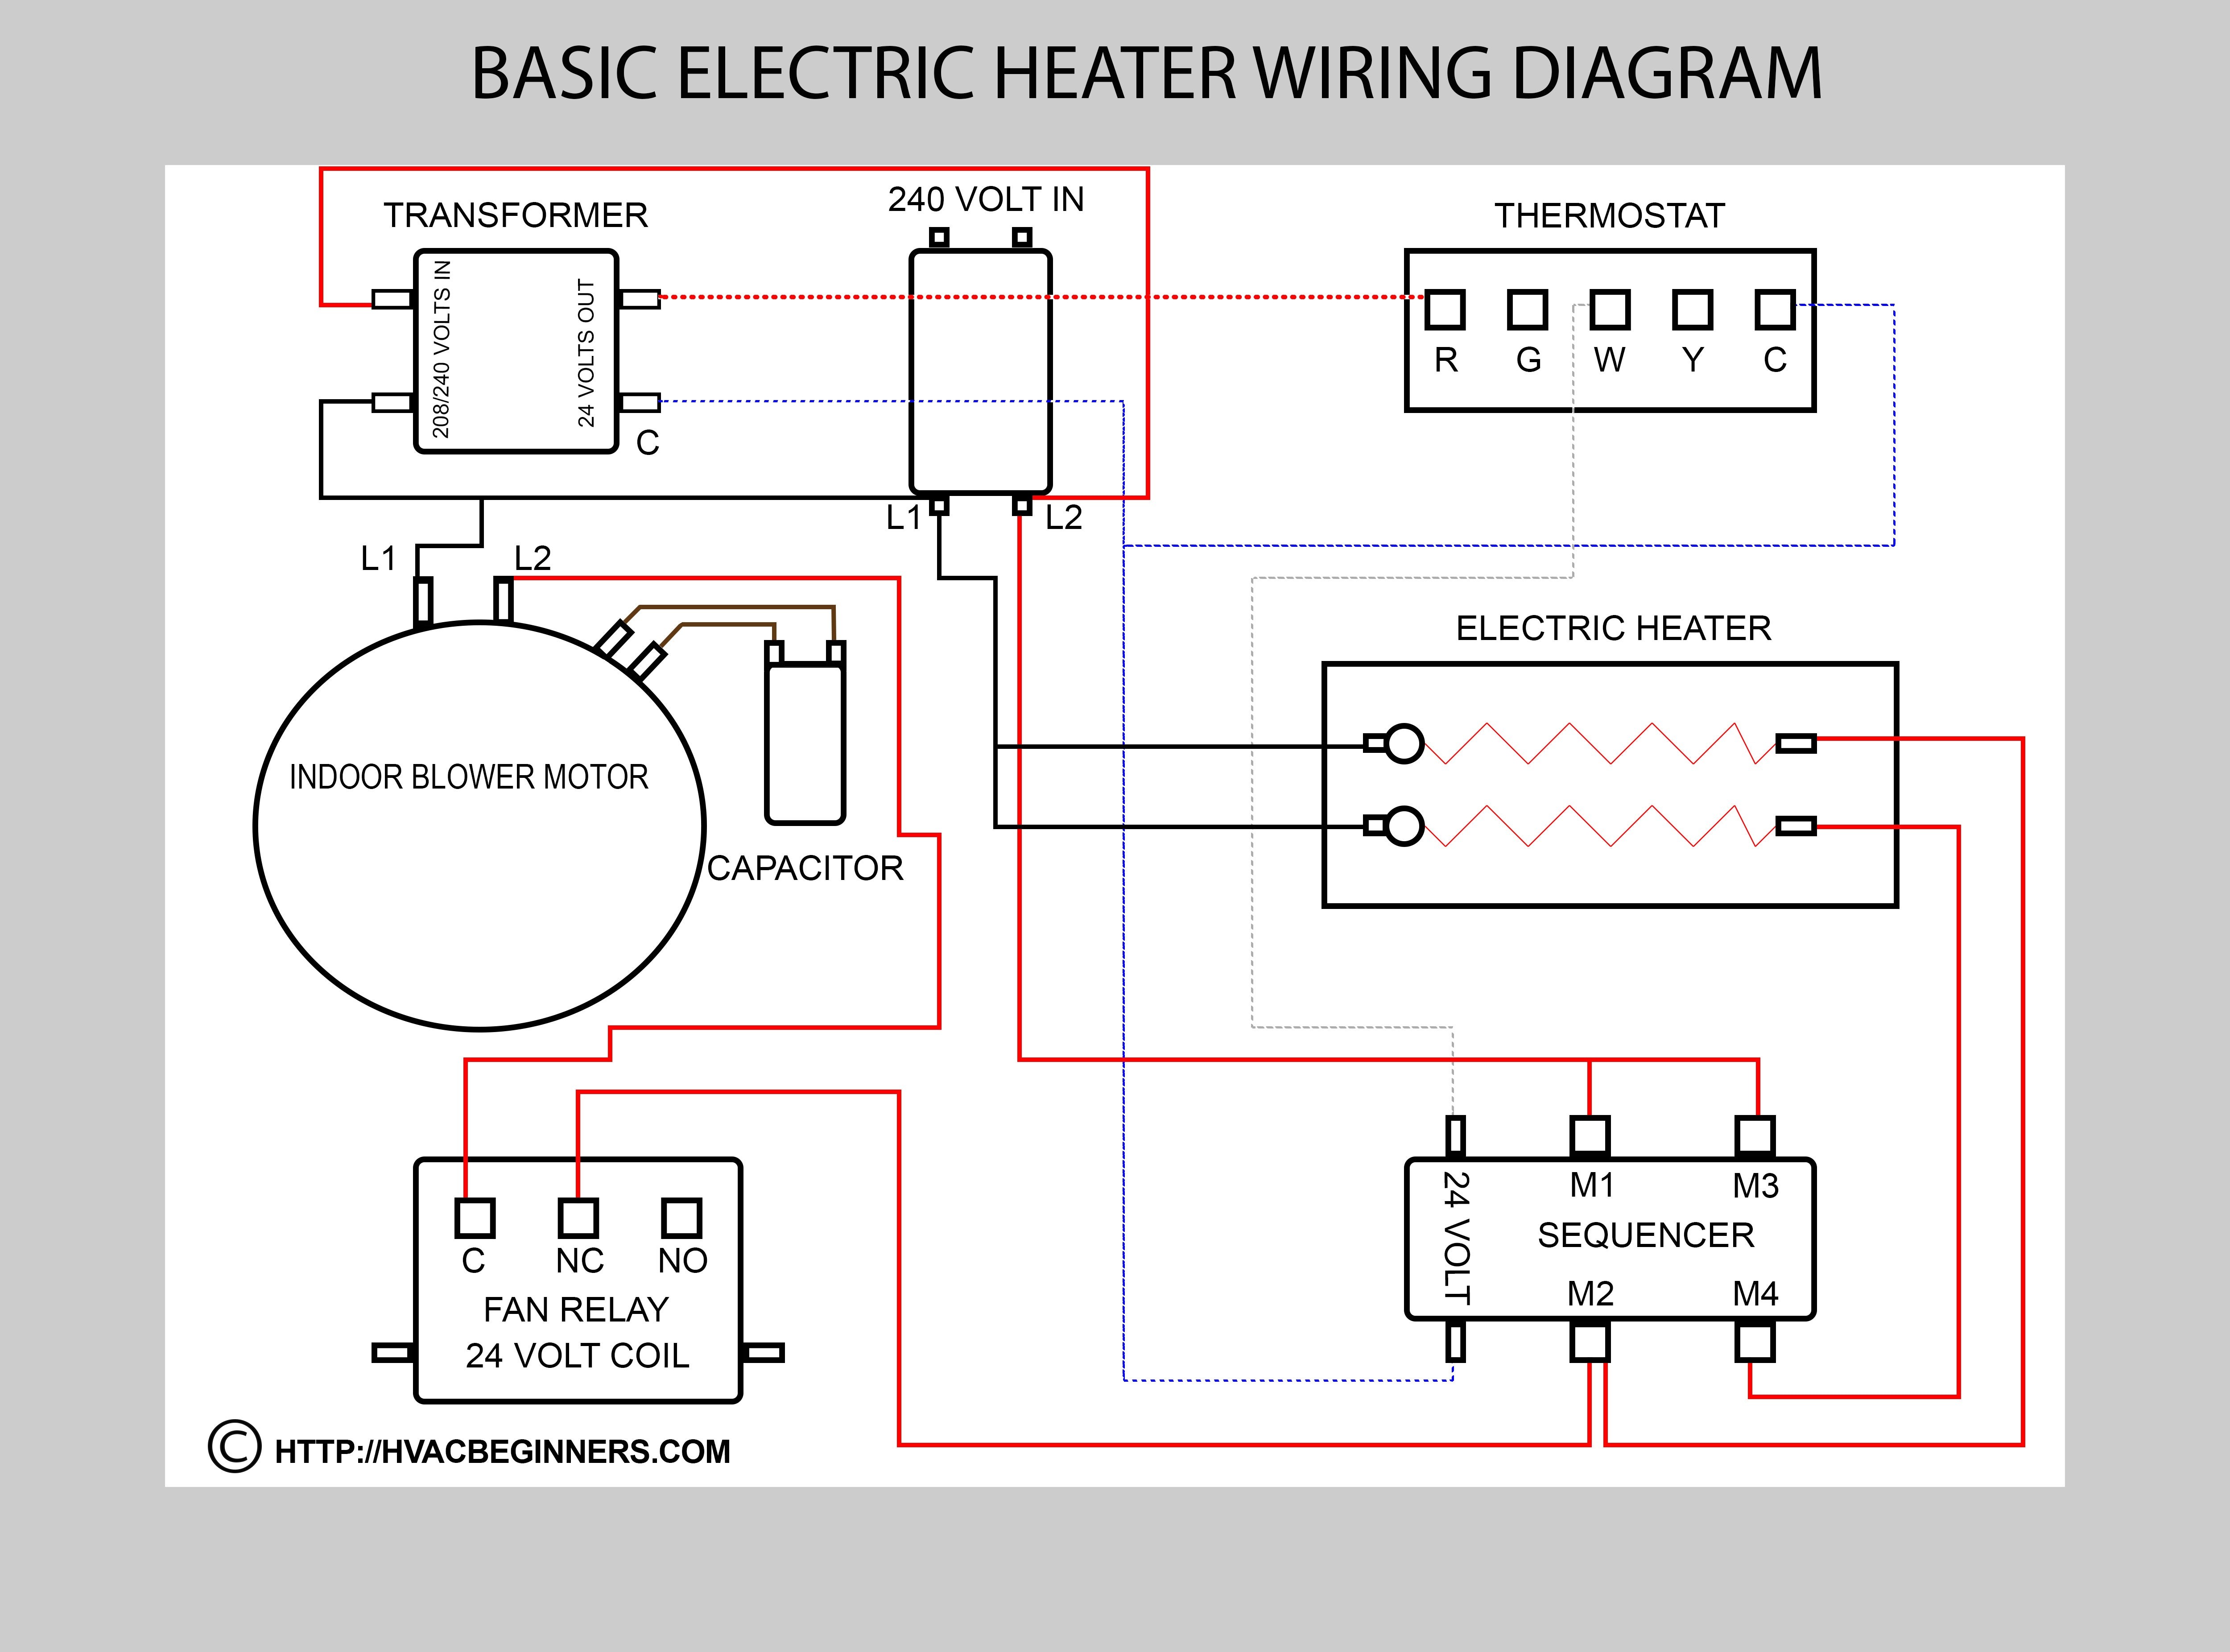 Split system air conditioner wiring diagram hvac wire central and relay pressor parts allowed picture nor